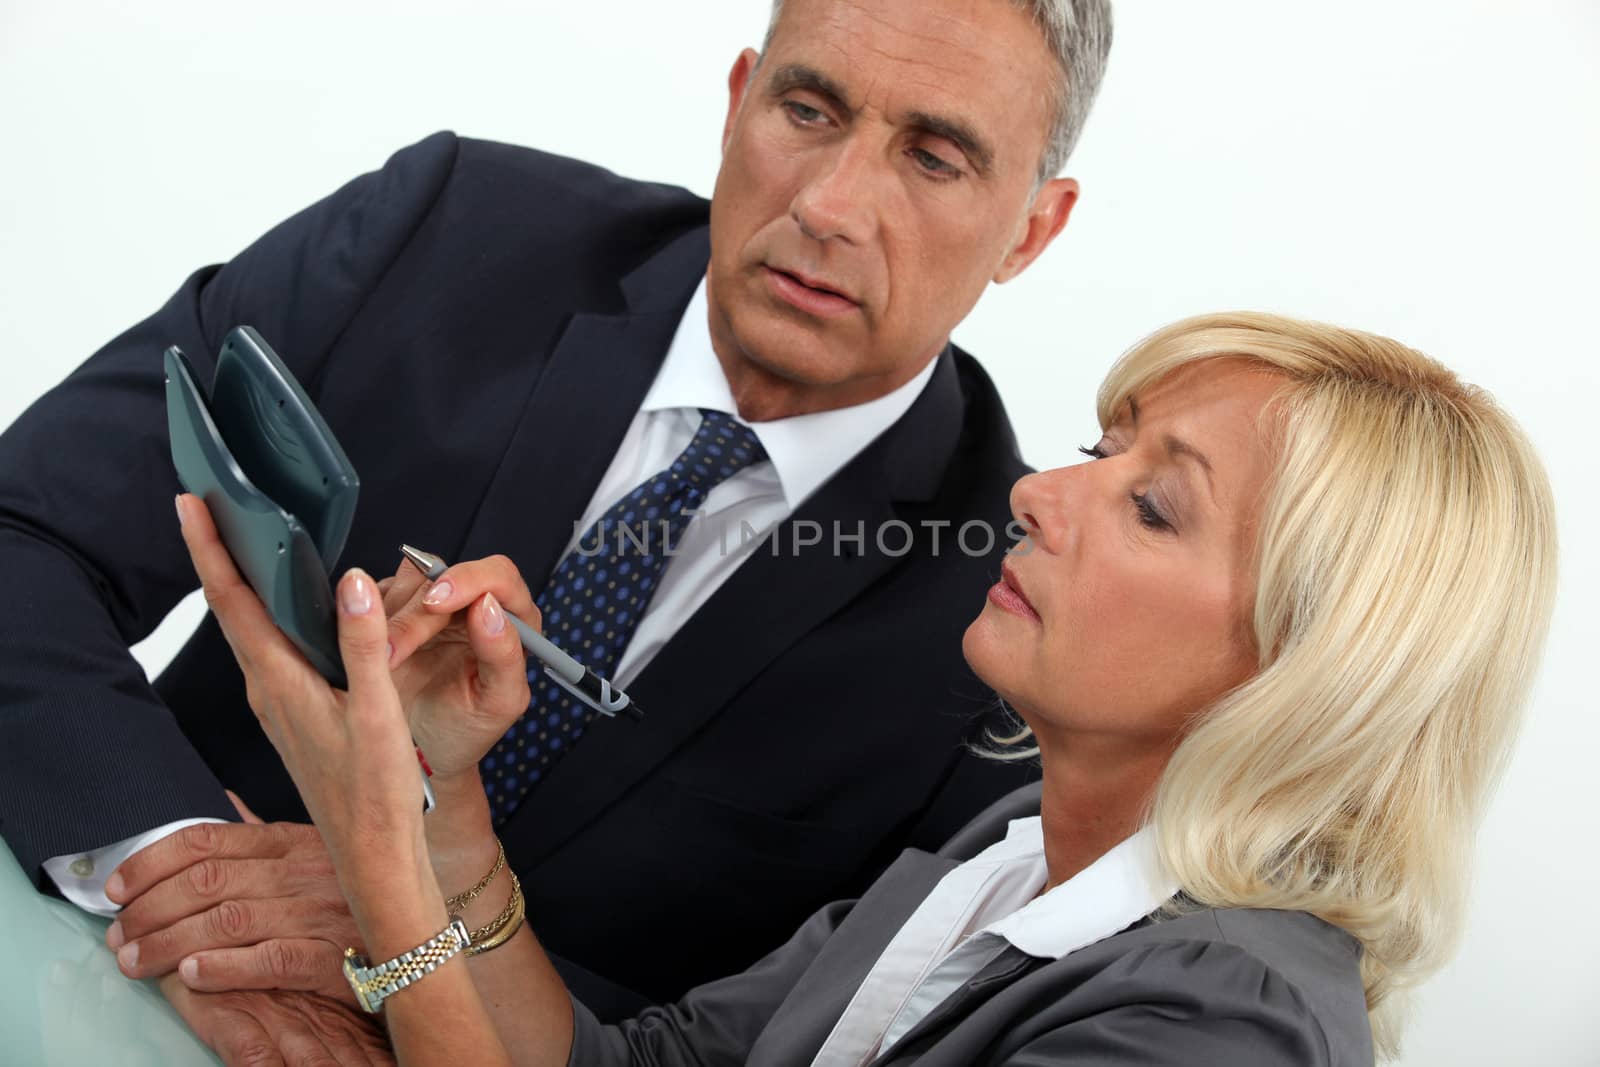 middleaged businessman with female counterpart